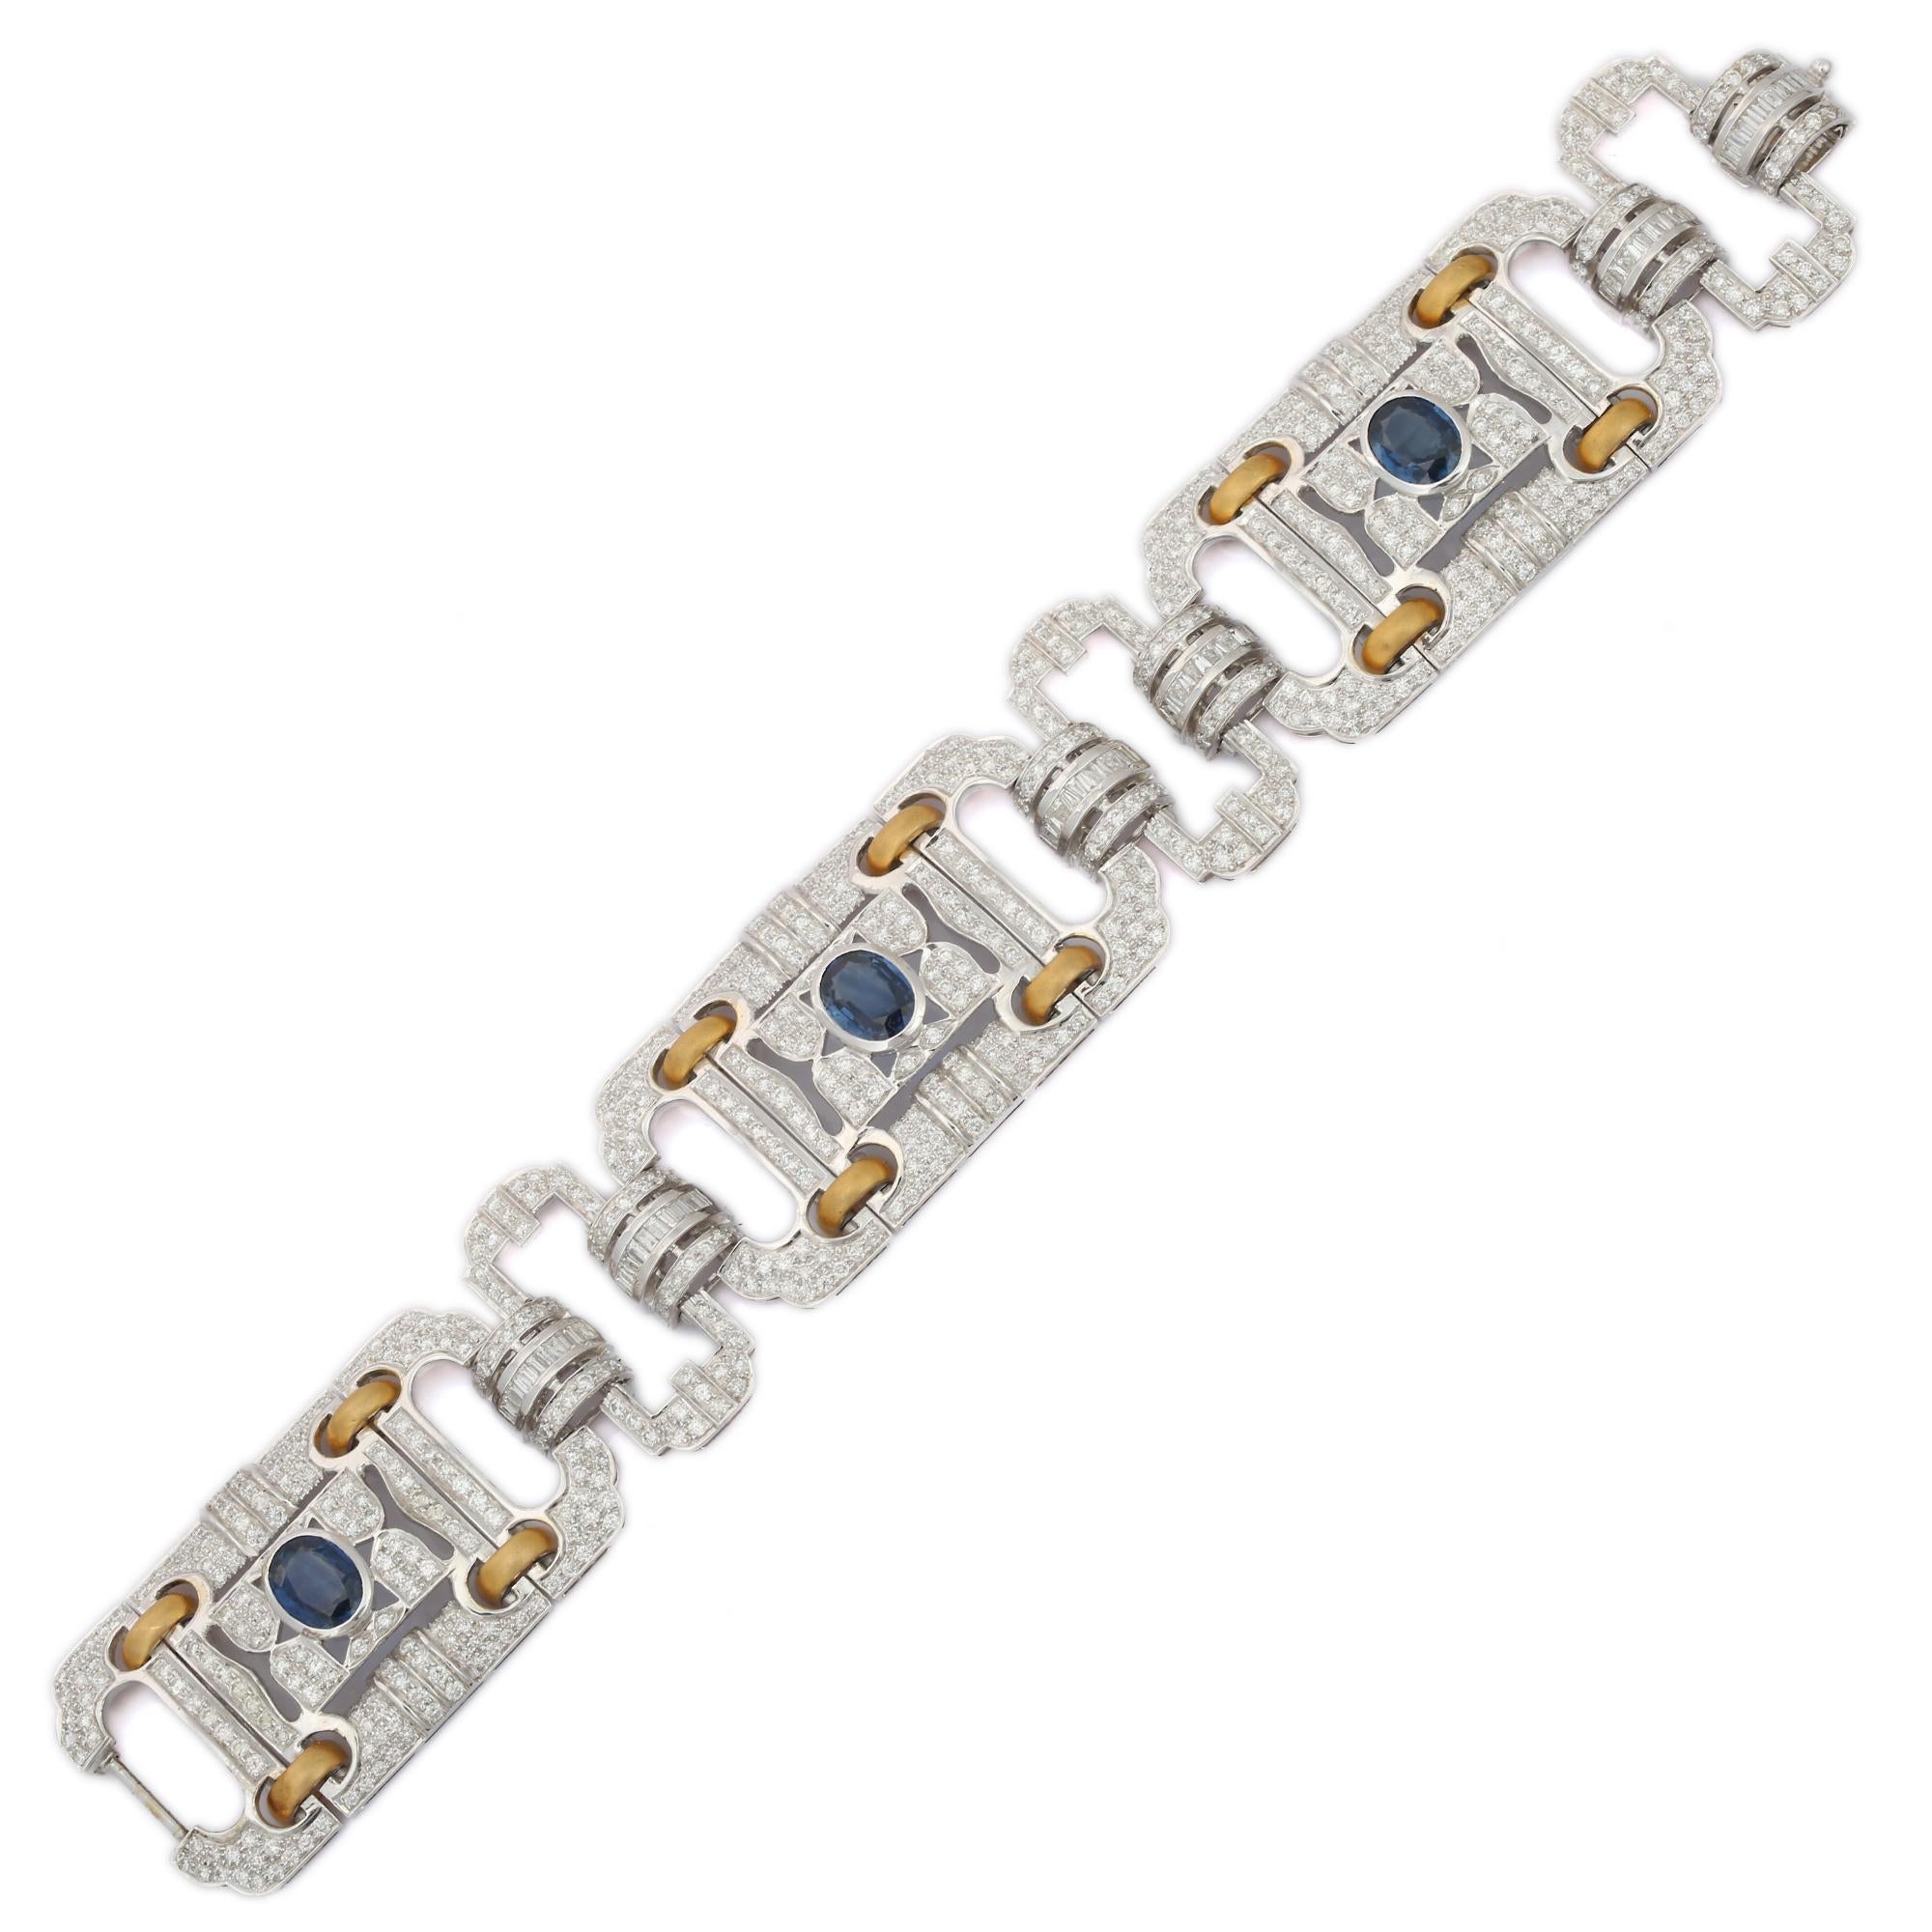 This Art Deco Inspired Sapphire Diamond Bracelet in 18K gold showcases 3 endlessly sparkling natural sapphire weighing 6.4 carats with diamonds of 10.5 carats. It measures 7.025 inches long in length. 
Sapphire stimulate concentration and reduces